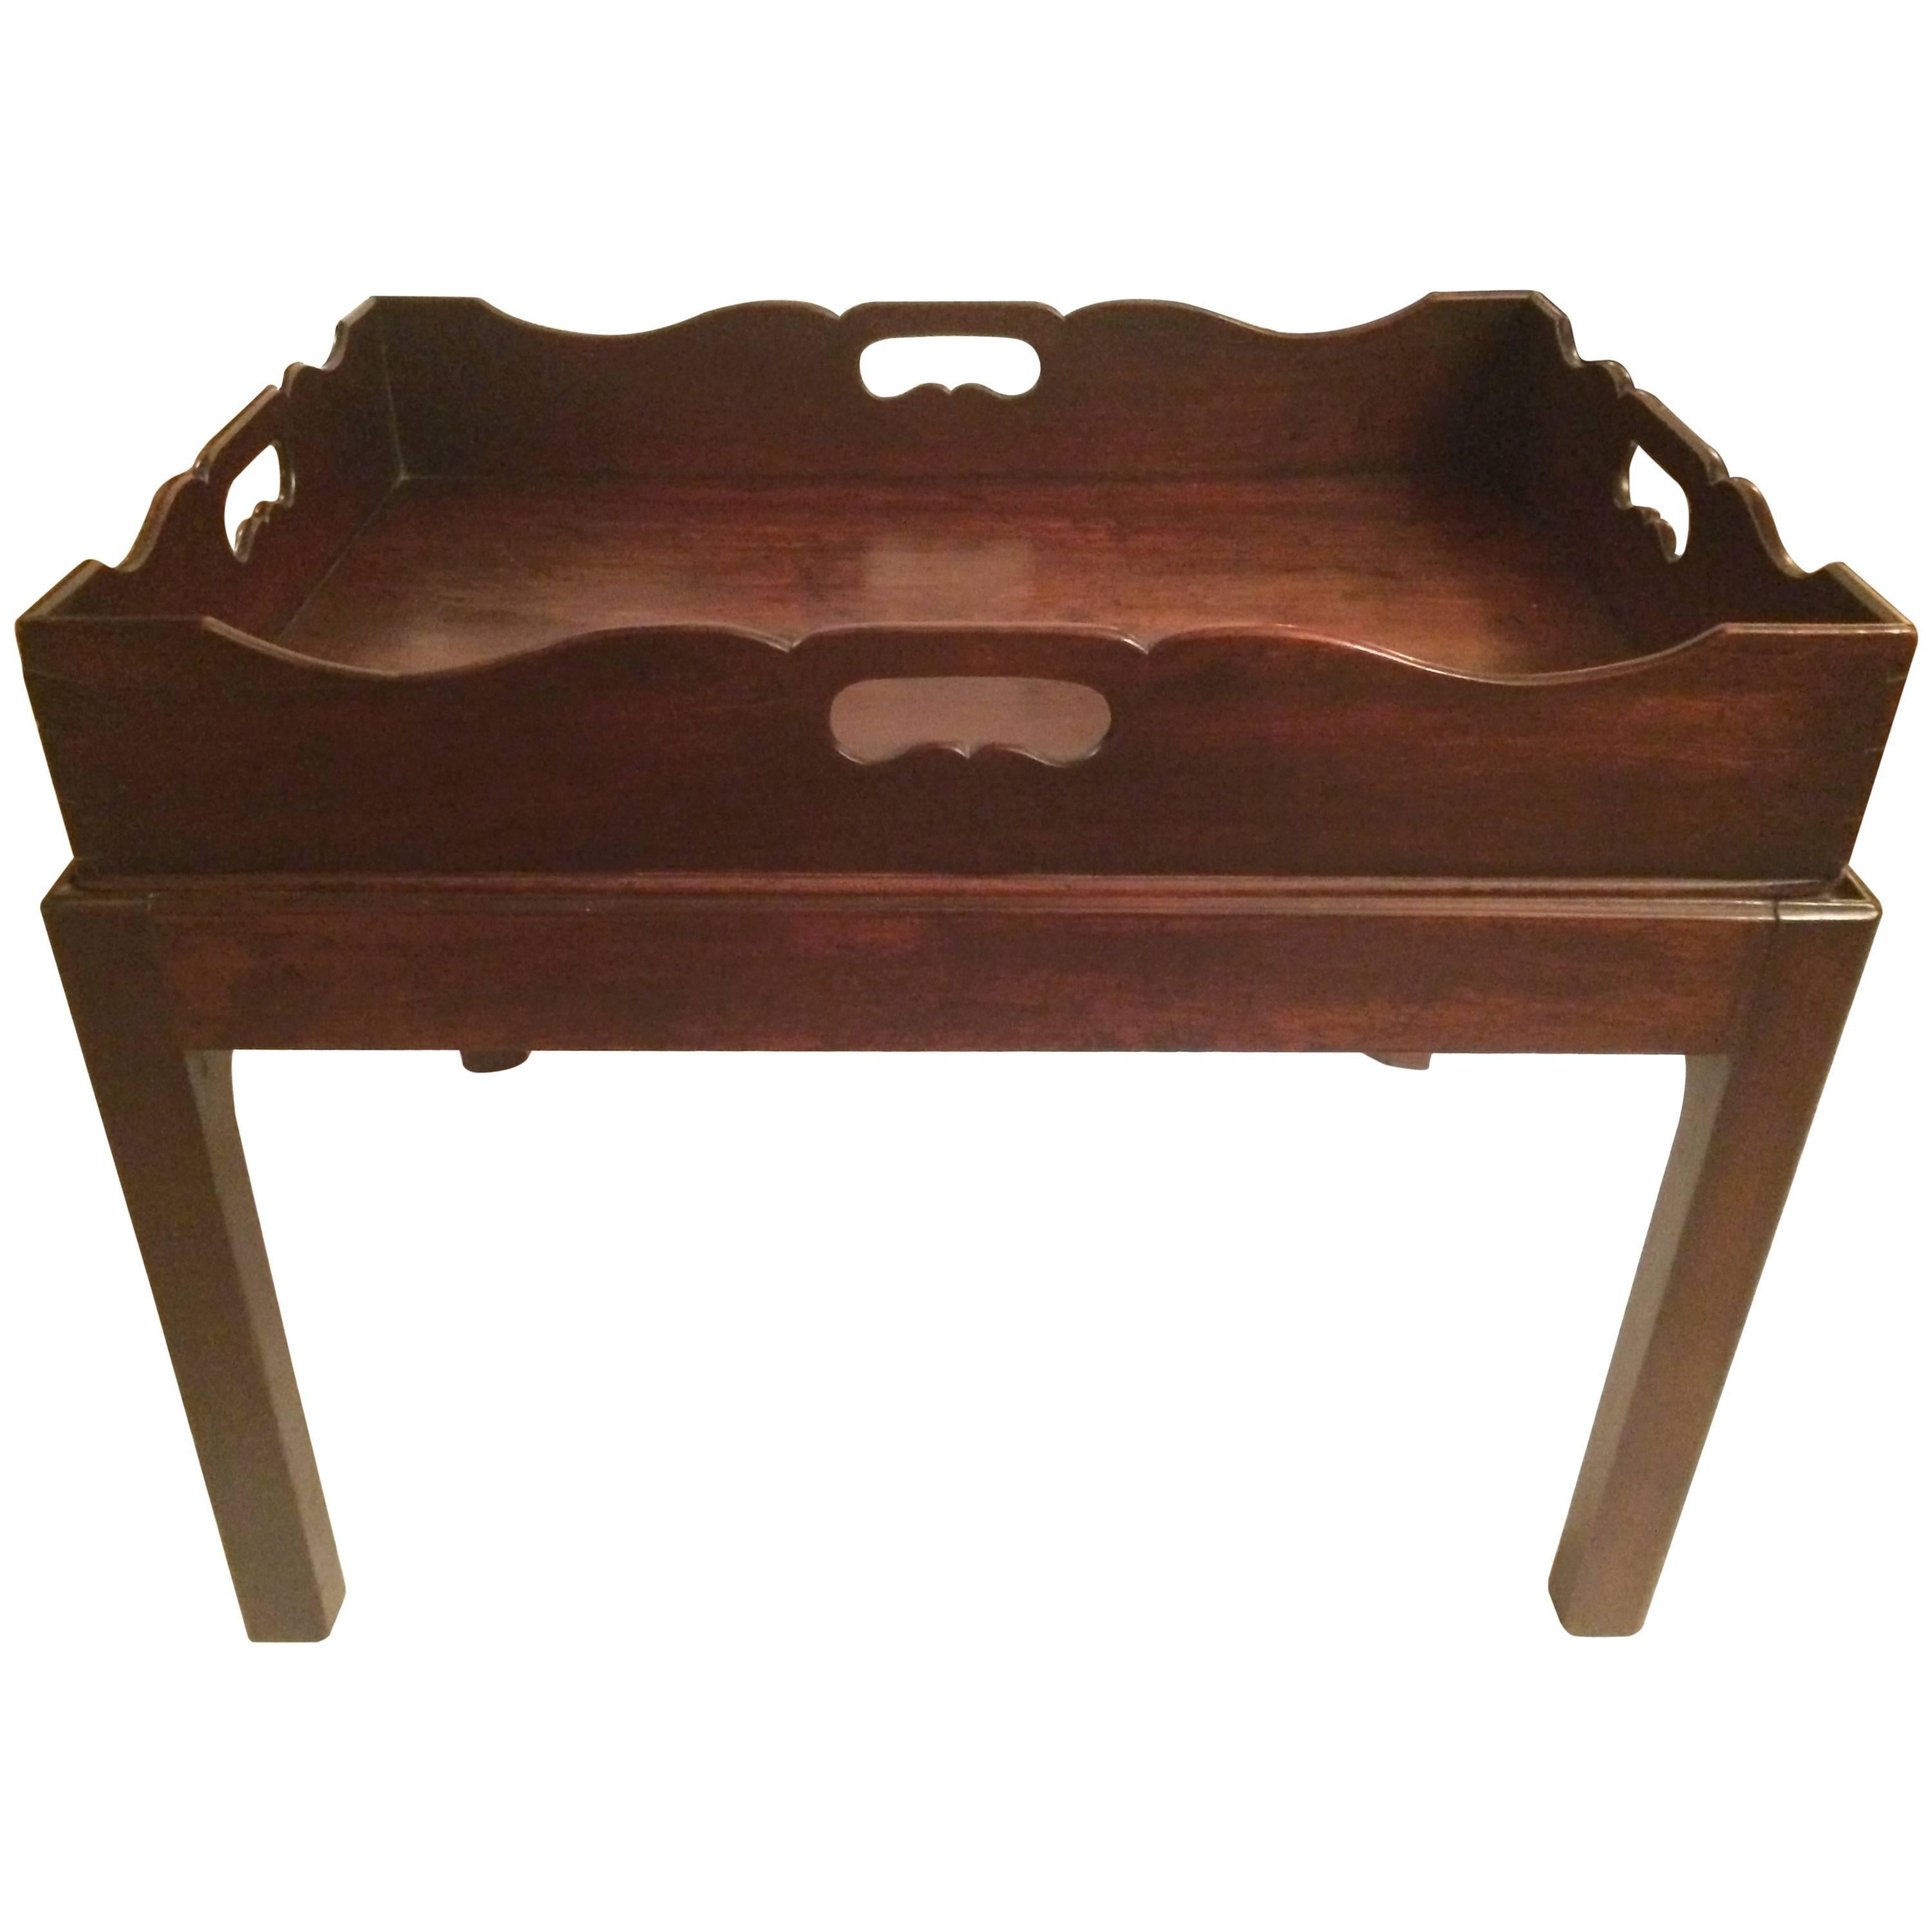 English George III mahogany tray on stand (tray table), circa 1850. Scalloped shaped gallery and pierced carrying handles.